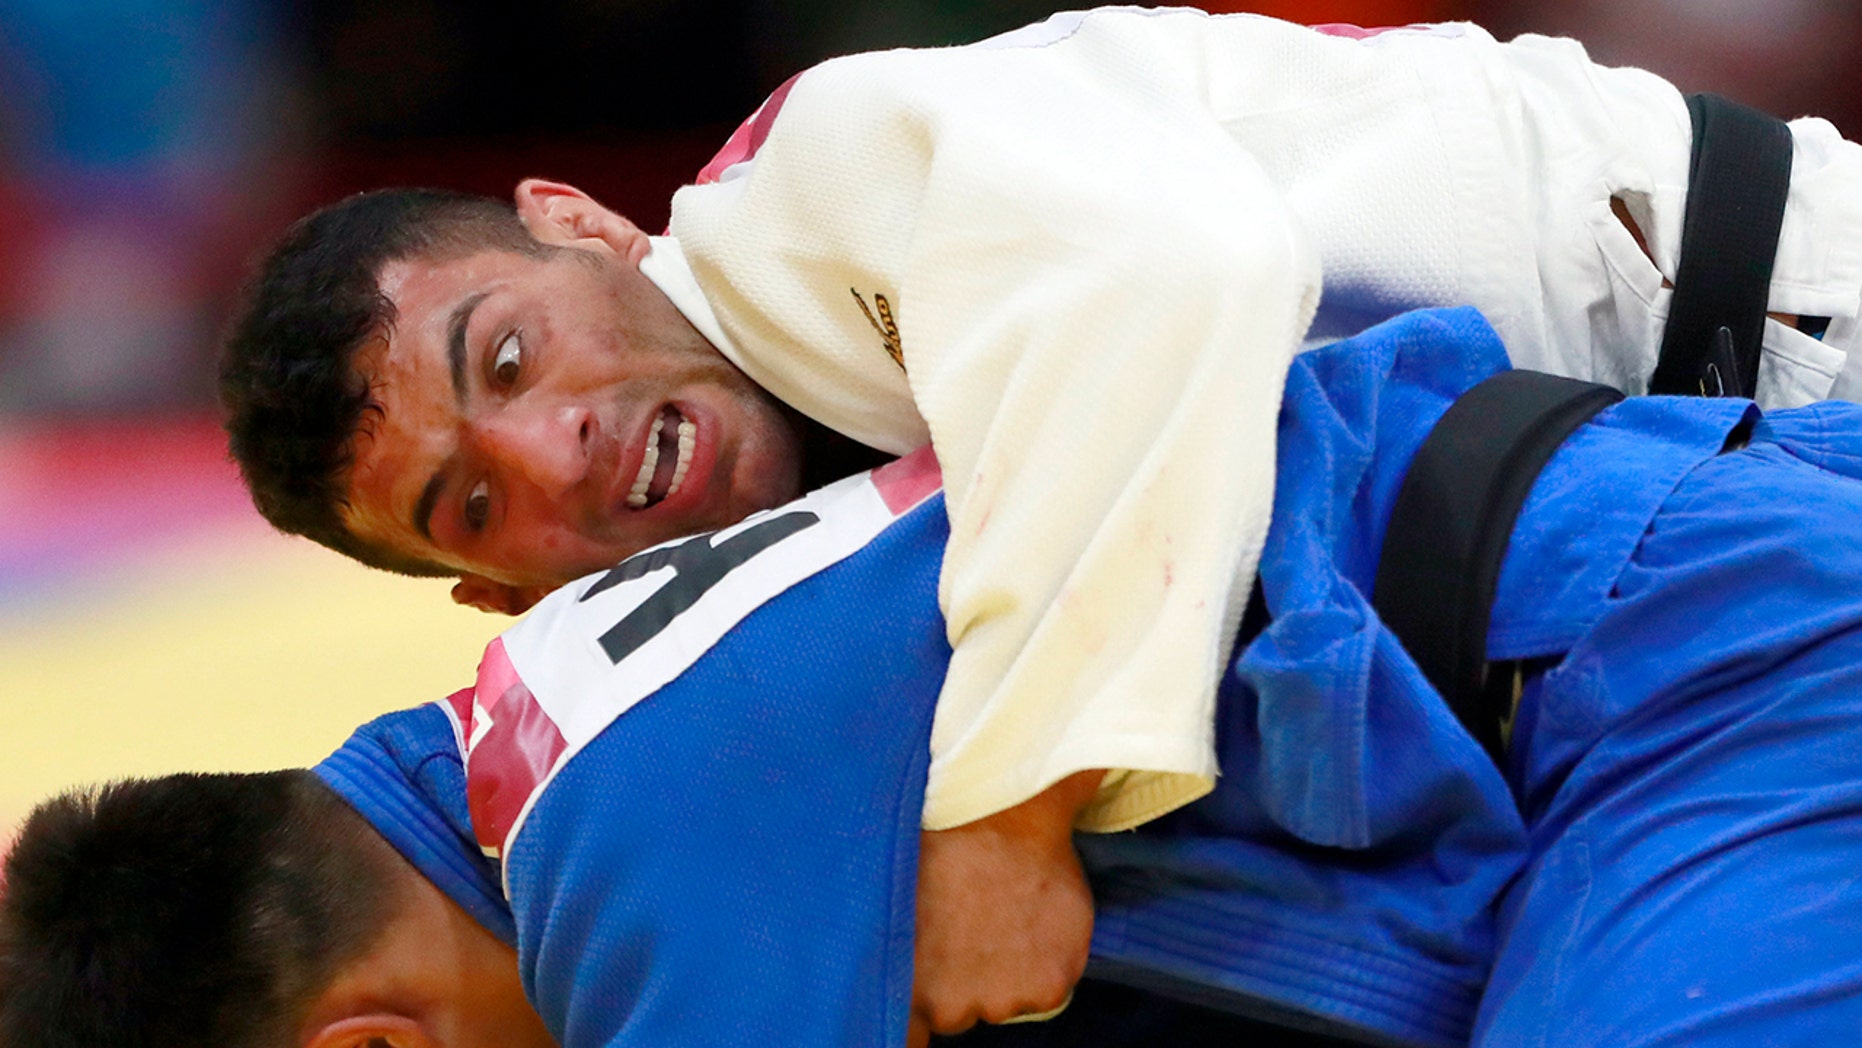 FILE - In this Thursday, Aug. 30, 2018 file photo, Saeid Mollaei of Iran, top, competes against Didar Khamza of Kazakhstan during their men's - 81kg final judo match at the18th Asian Games in Jakarta, Indonesia. Judo world champion Iran has been banned from international judo competitions for refusing to let its athletes fight Israeli opponents. The International Judo Federation has imposed an indefinite ban on Iran’s team until it promises to end a long-running boycott of Israel. (AP Photo/Tatan Syuflana, File)